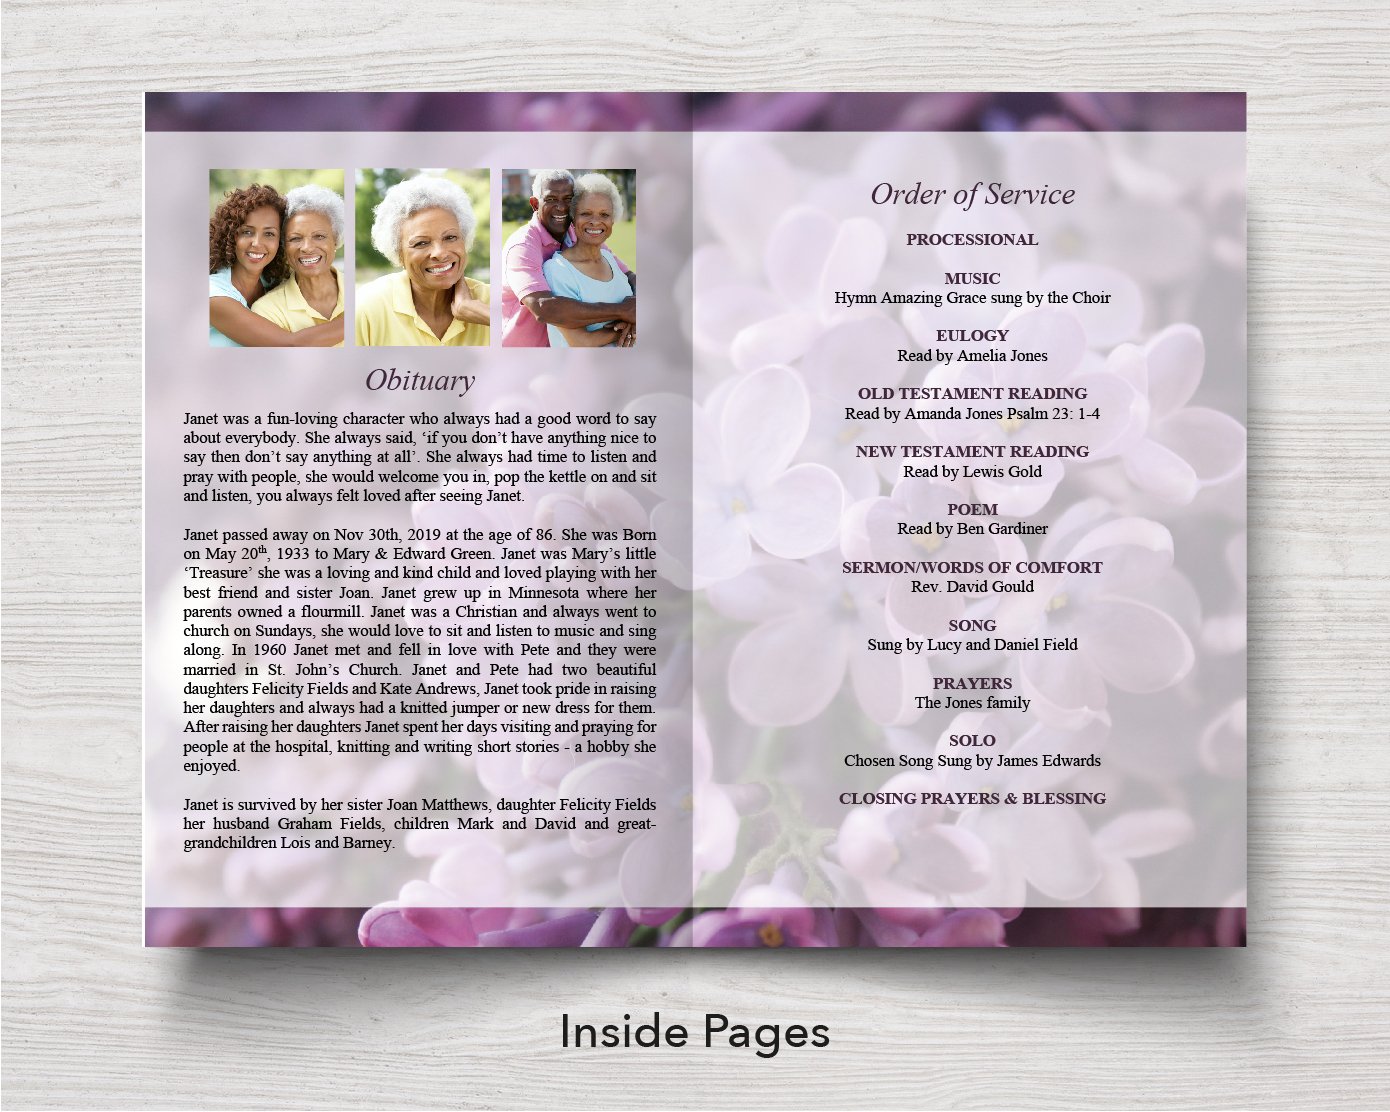 4 Page Purple Buds Funeral Program Template